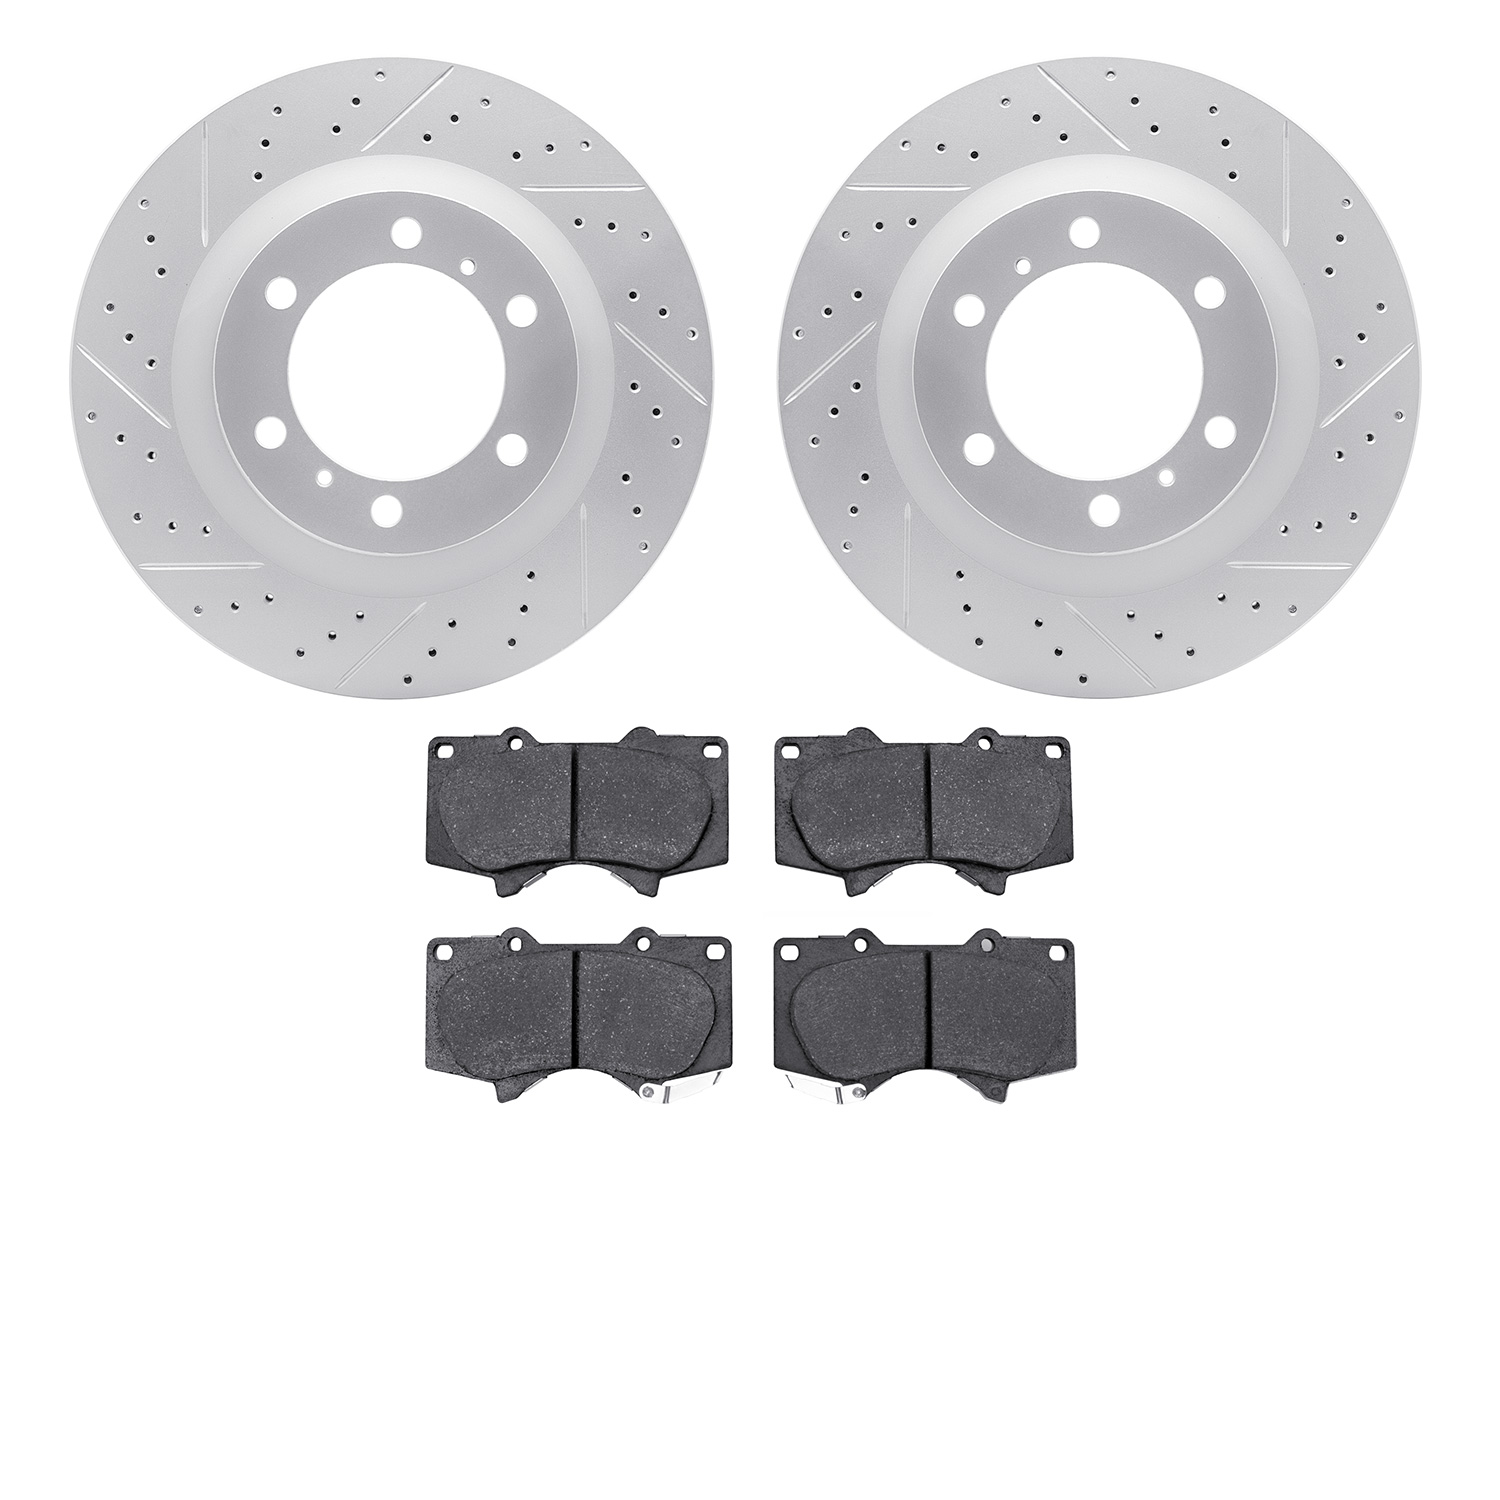 2402-76016 Geoperformance Drilled/Slotted Brake Rotors with Ultimate-Duty Brake Pads Kit, Fits Select Lexus/Toyota/Scion, Positi